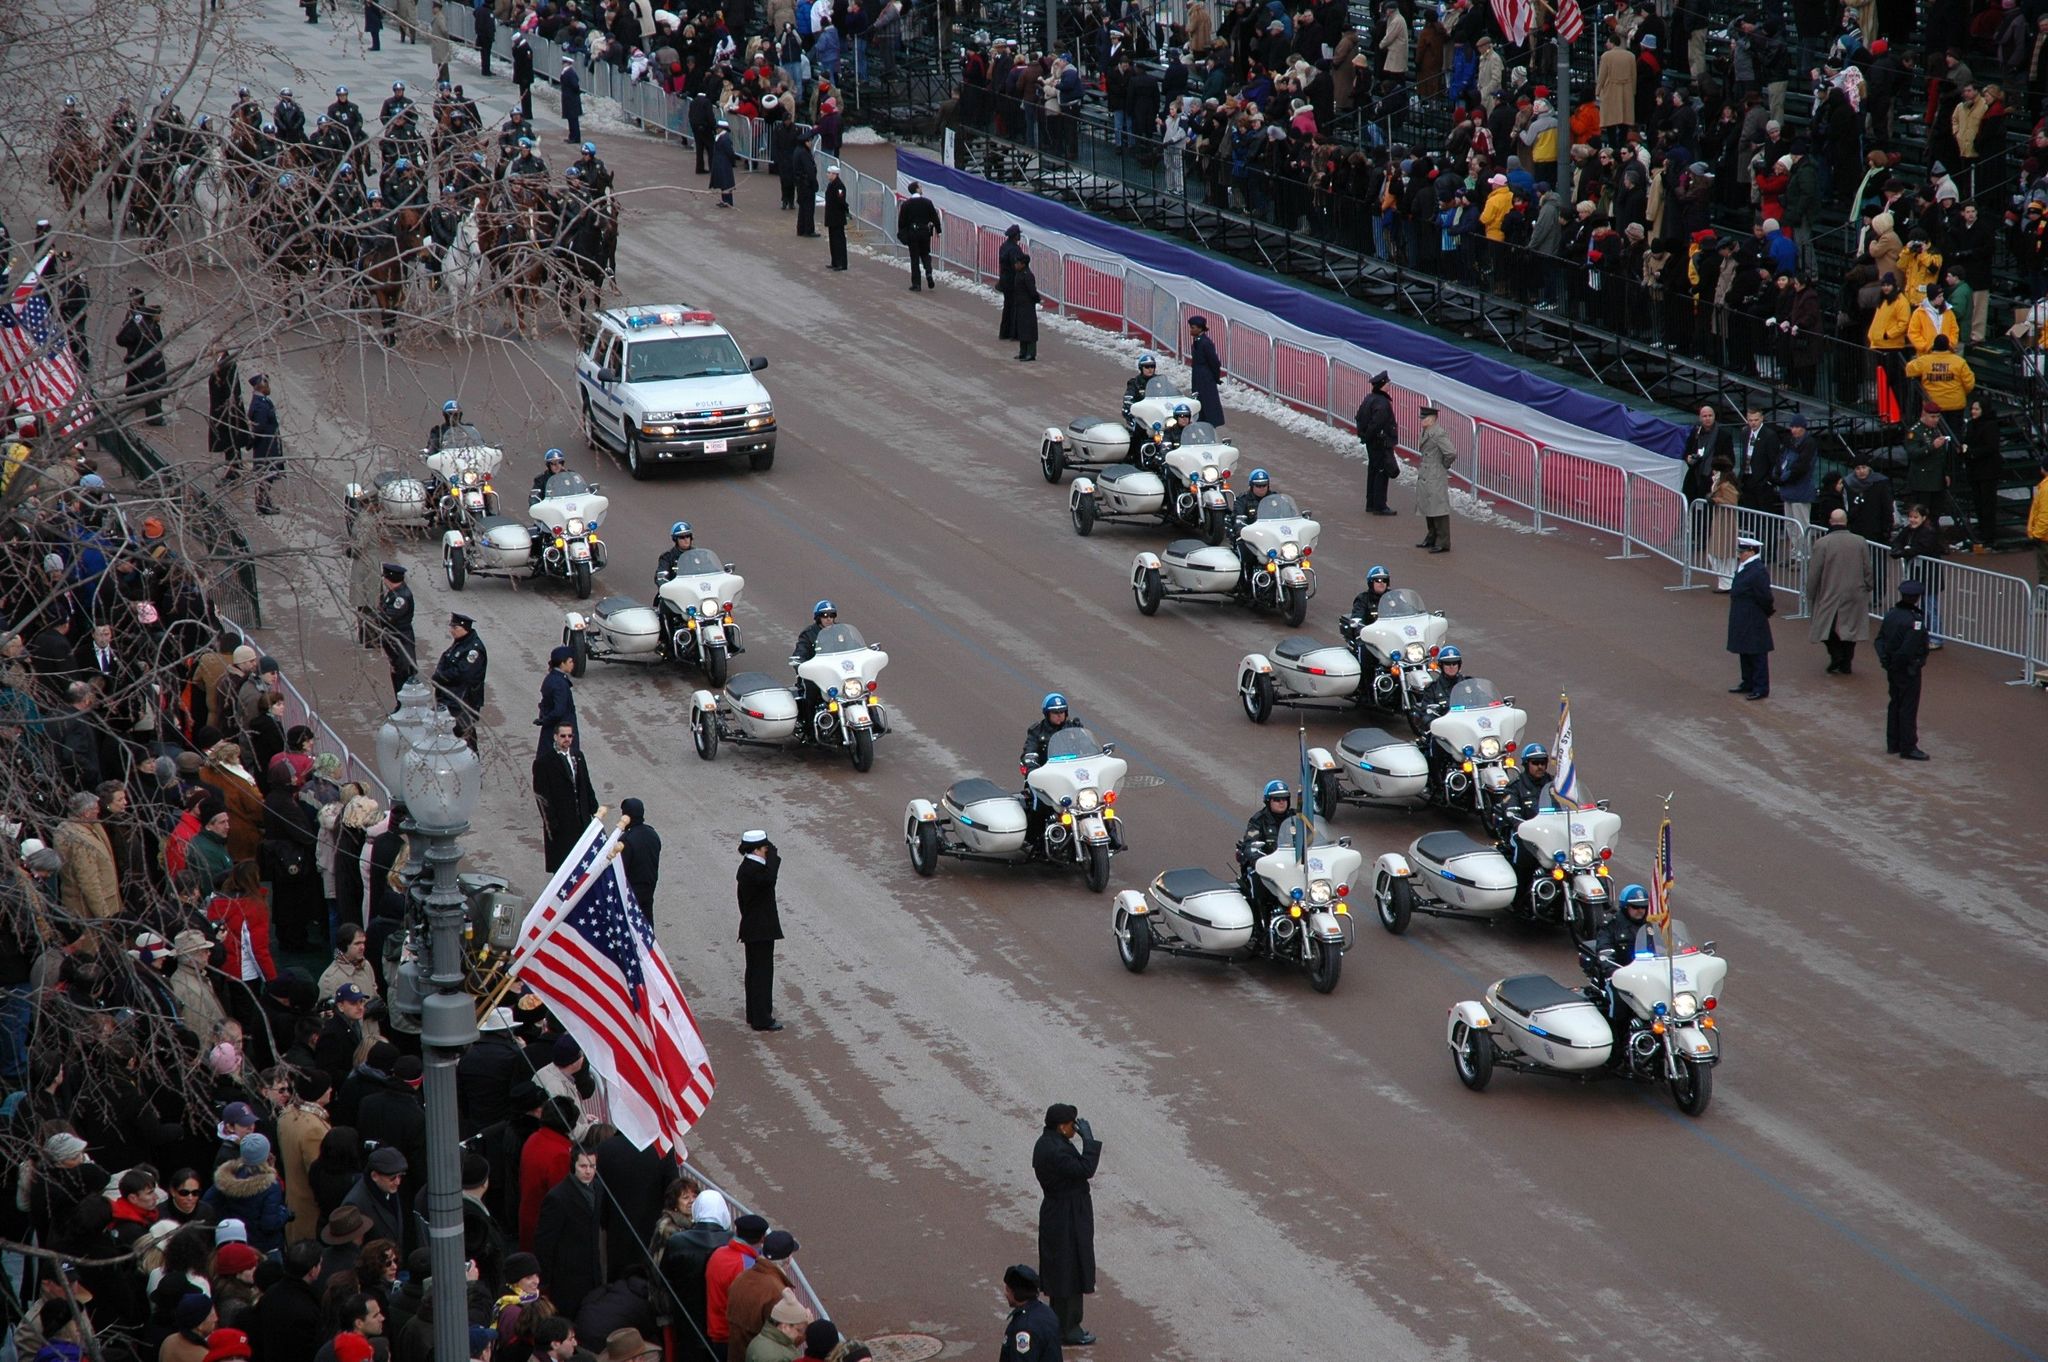 Police motorcycles pass in formation during the 2013 inaugural parade.